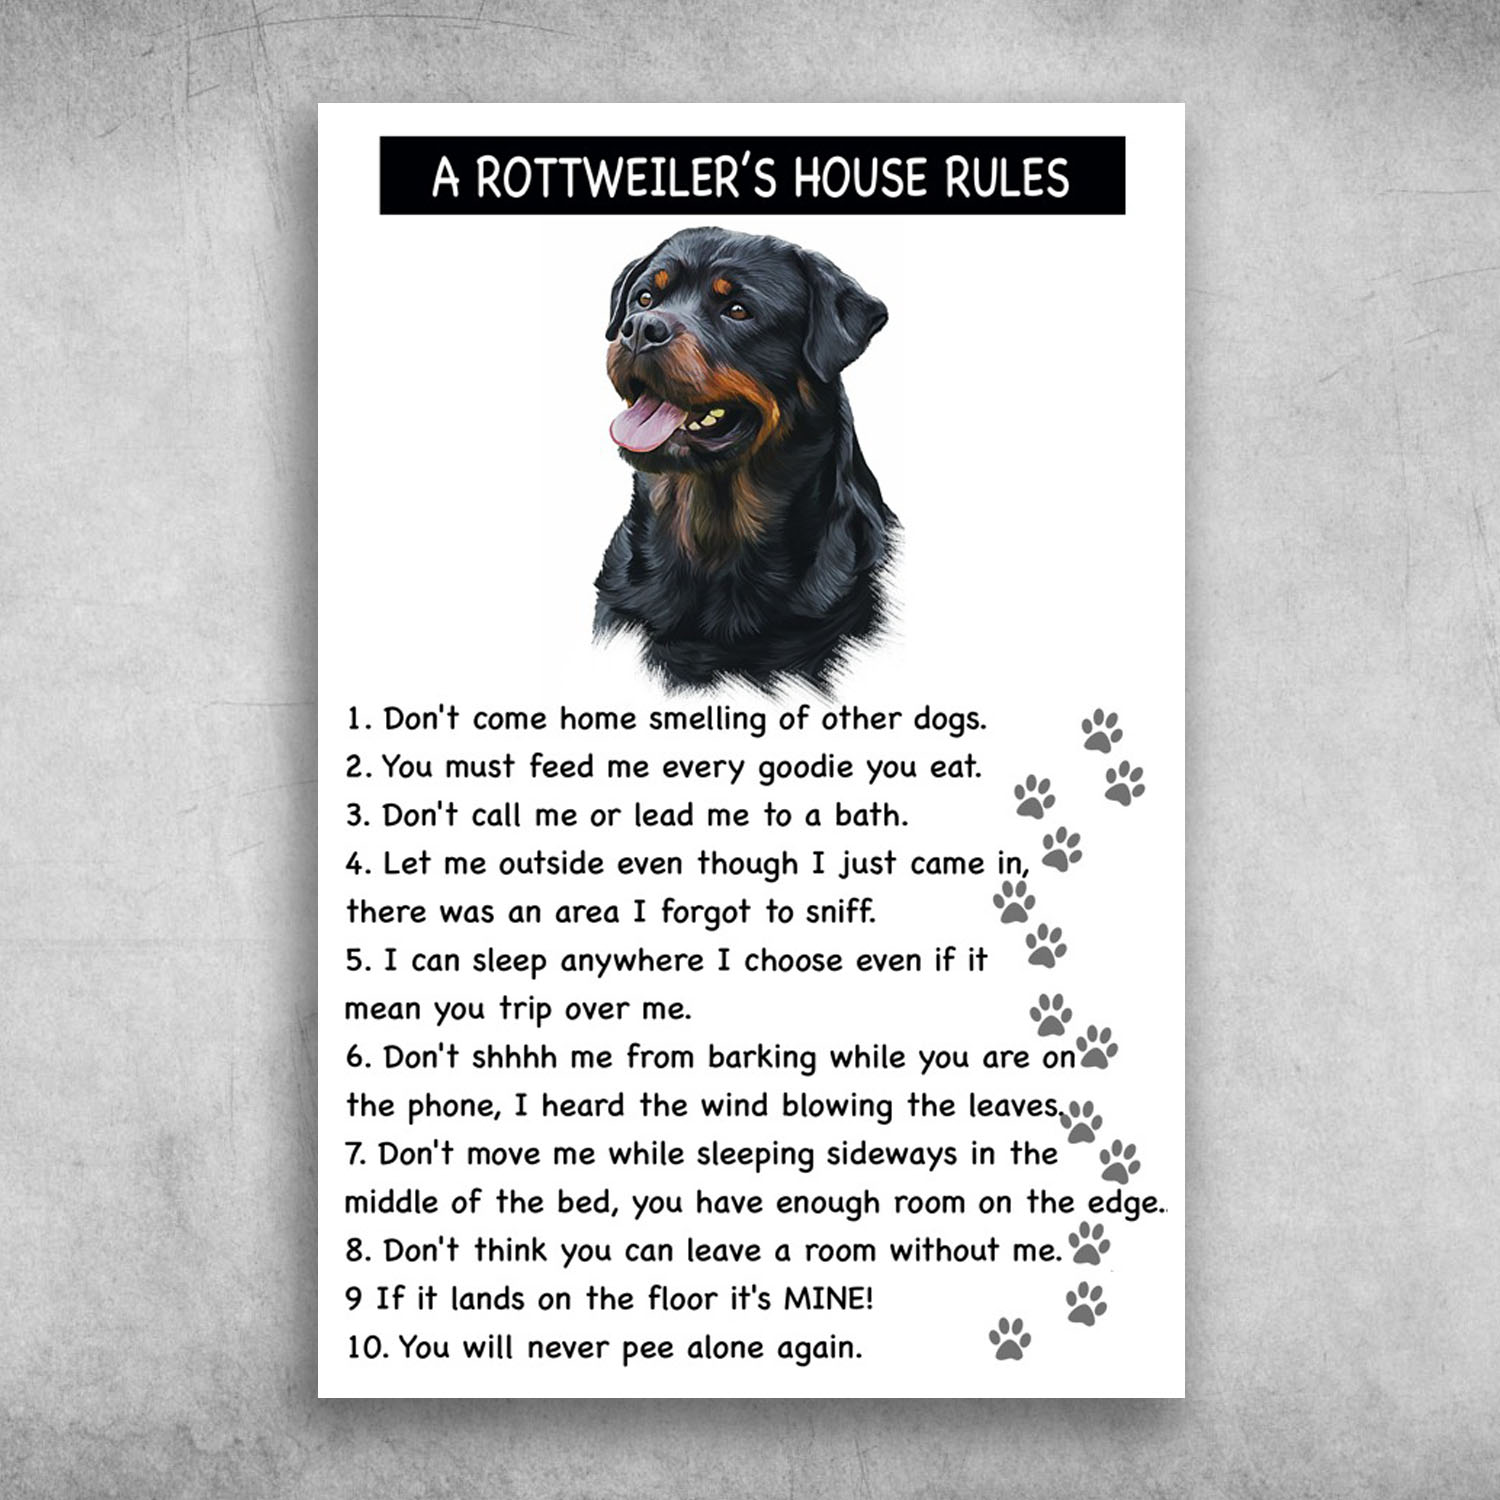 A Rottweiler's House Rules Don't Come Home